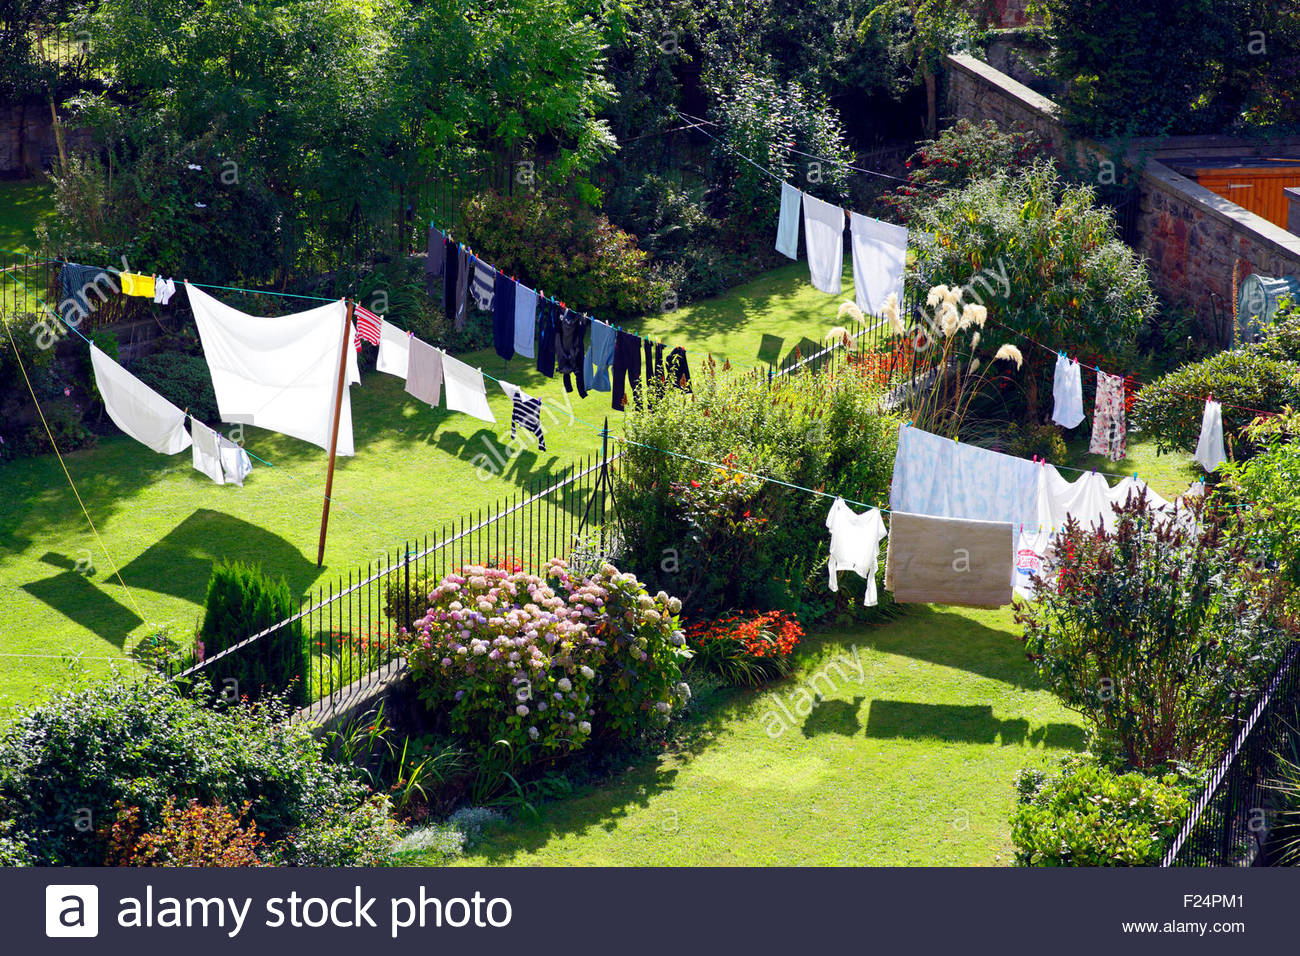 Washing line clothes drying in suburban back gardens Stock Photo